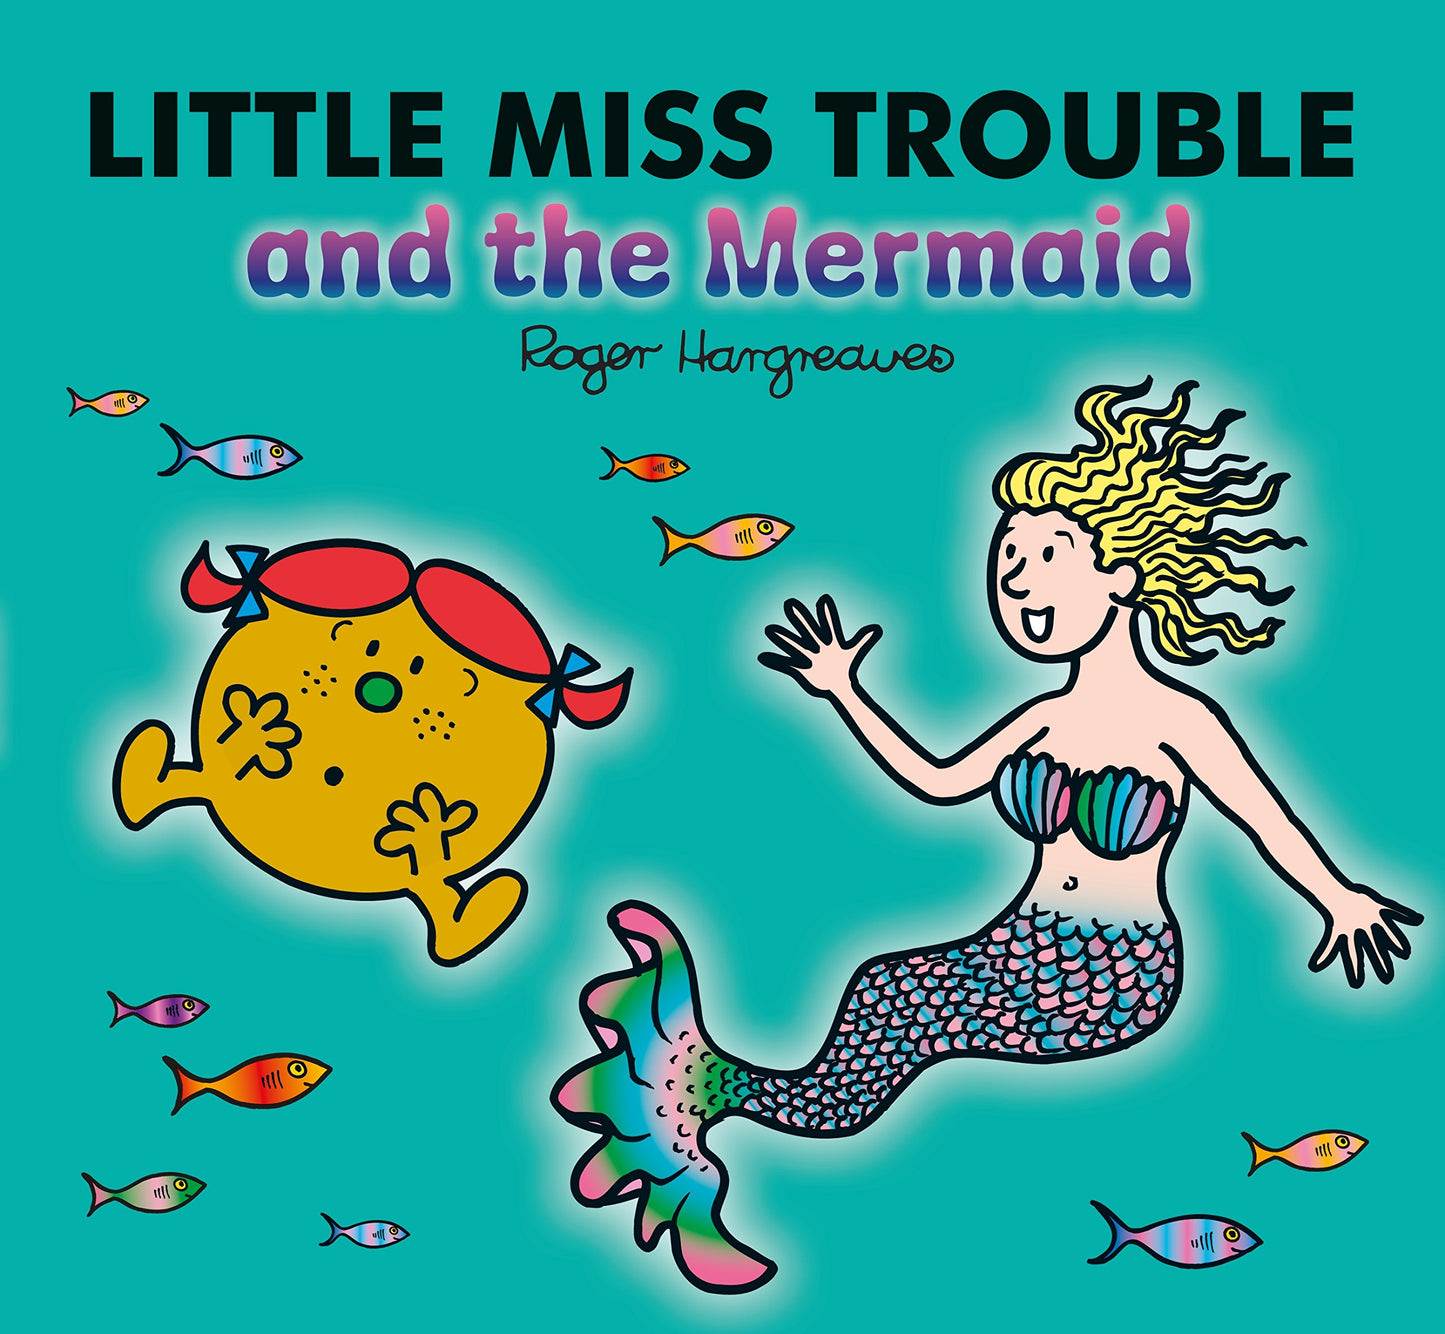 Little Miss Trouble and the Mermaid by Roger Hargreaves